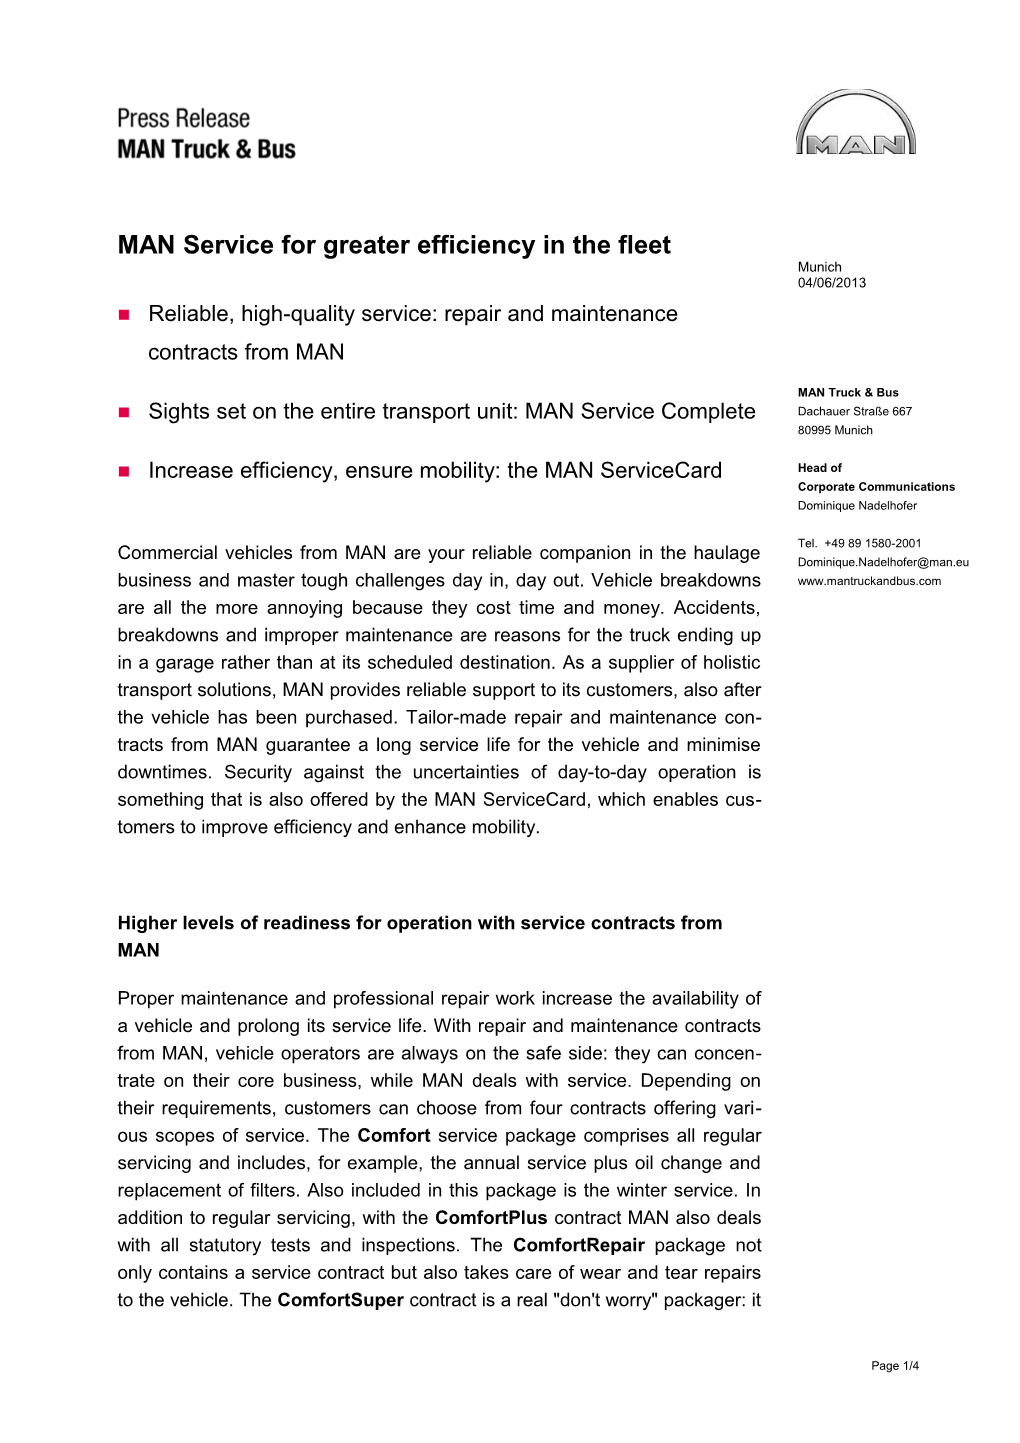 MAN Service for Greater Efficiency in the Fleet